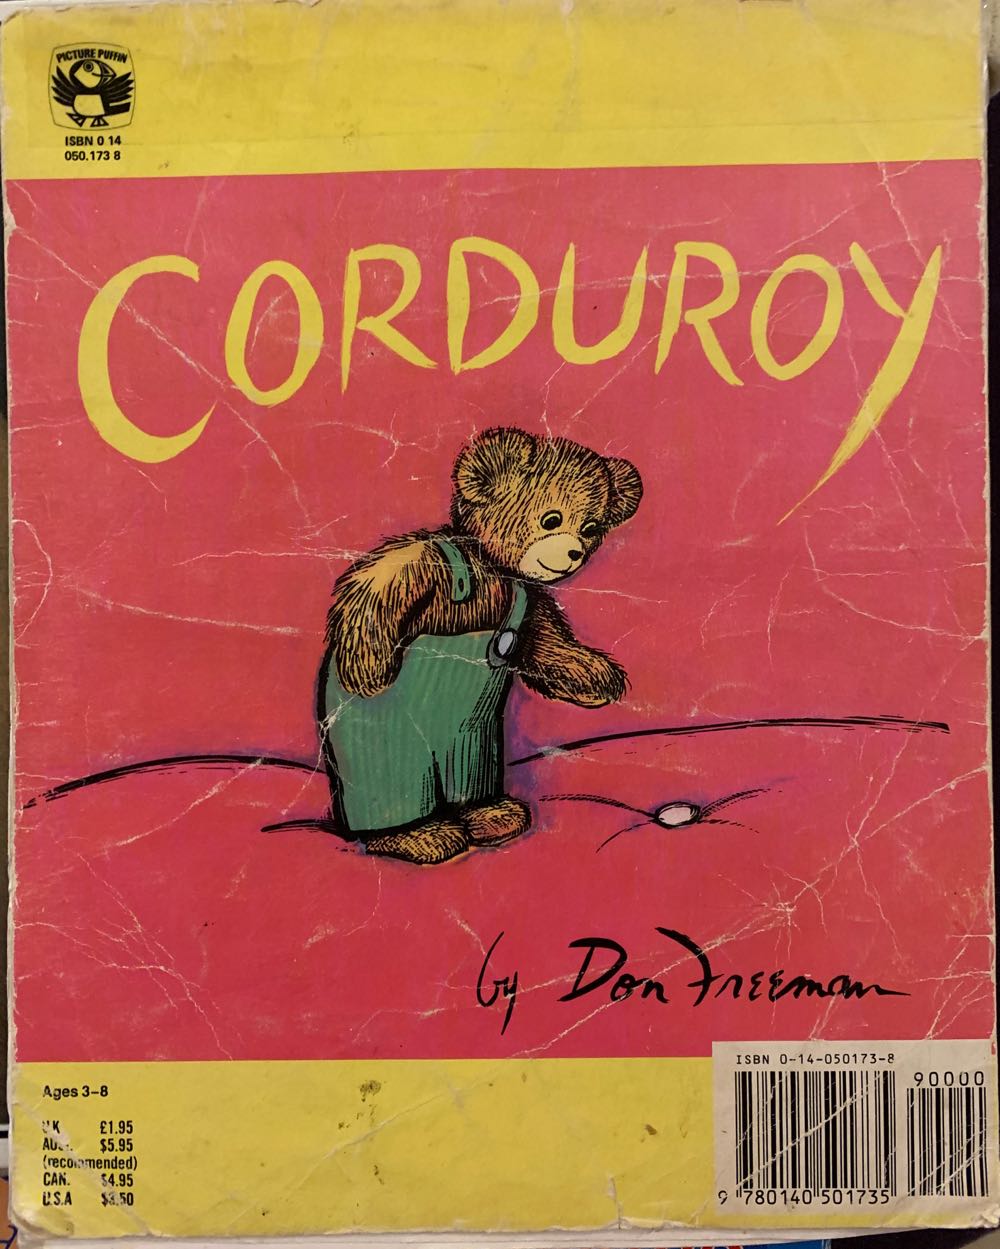 Corduroy - Don Freeman (Puffin Books - Penguin Group - Paperback) book collectible [Barcode 9780140501735] - Main Image 2